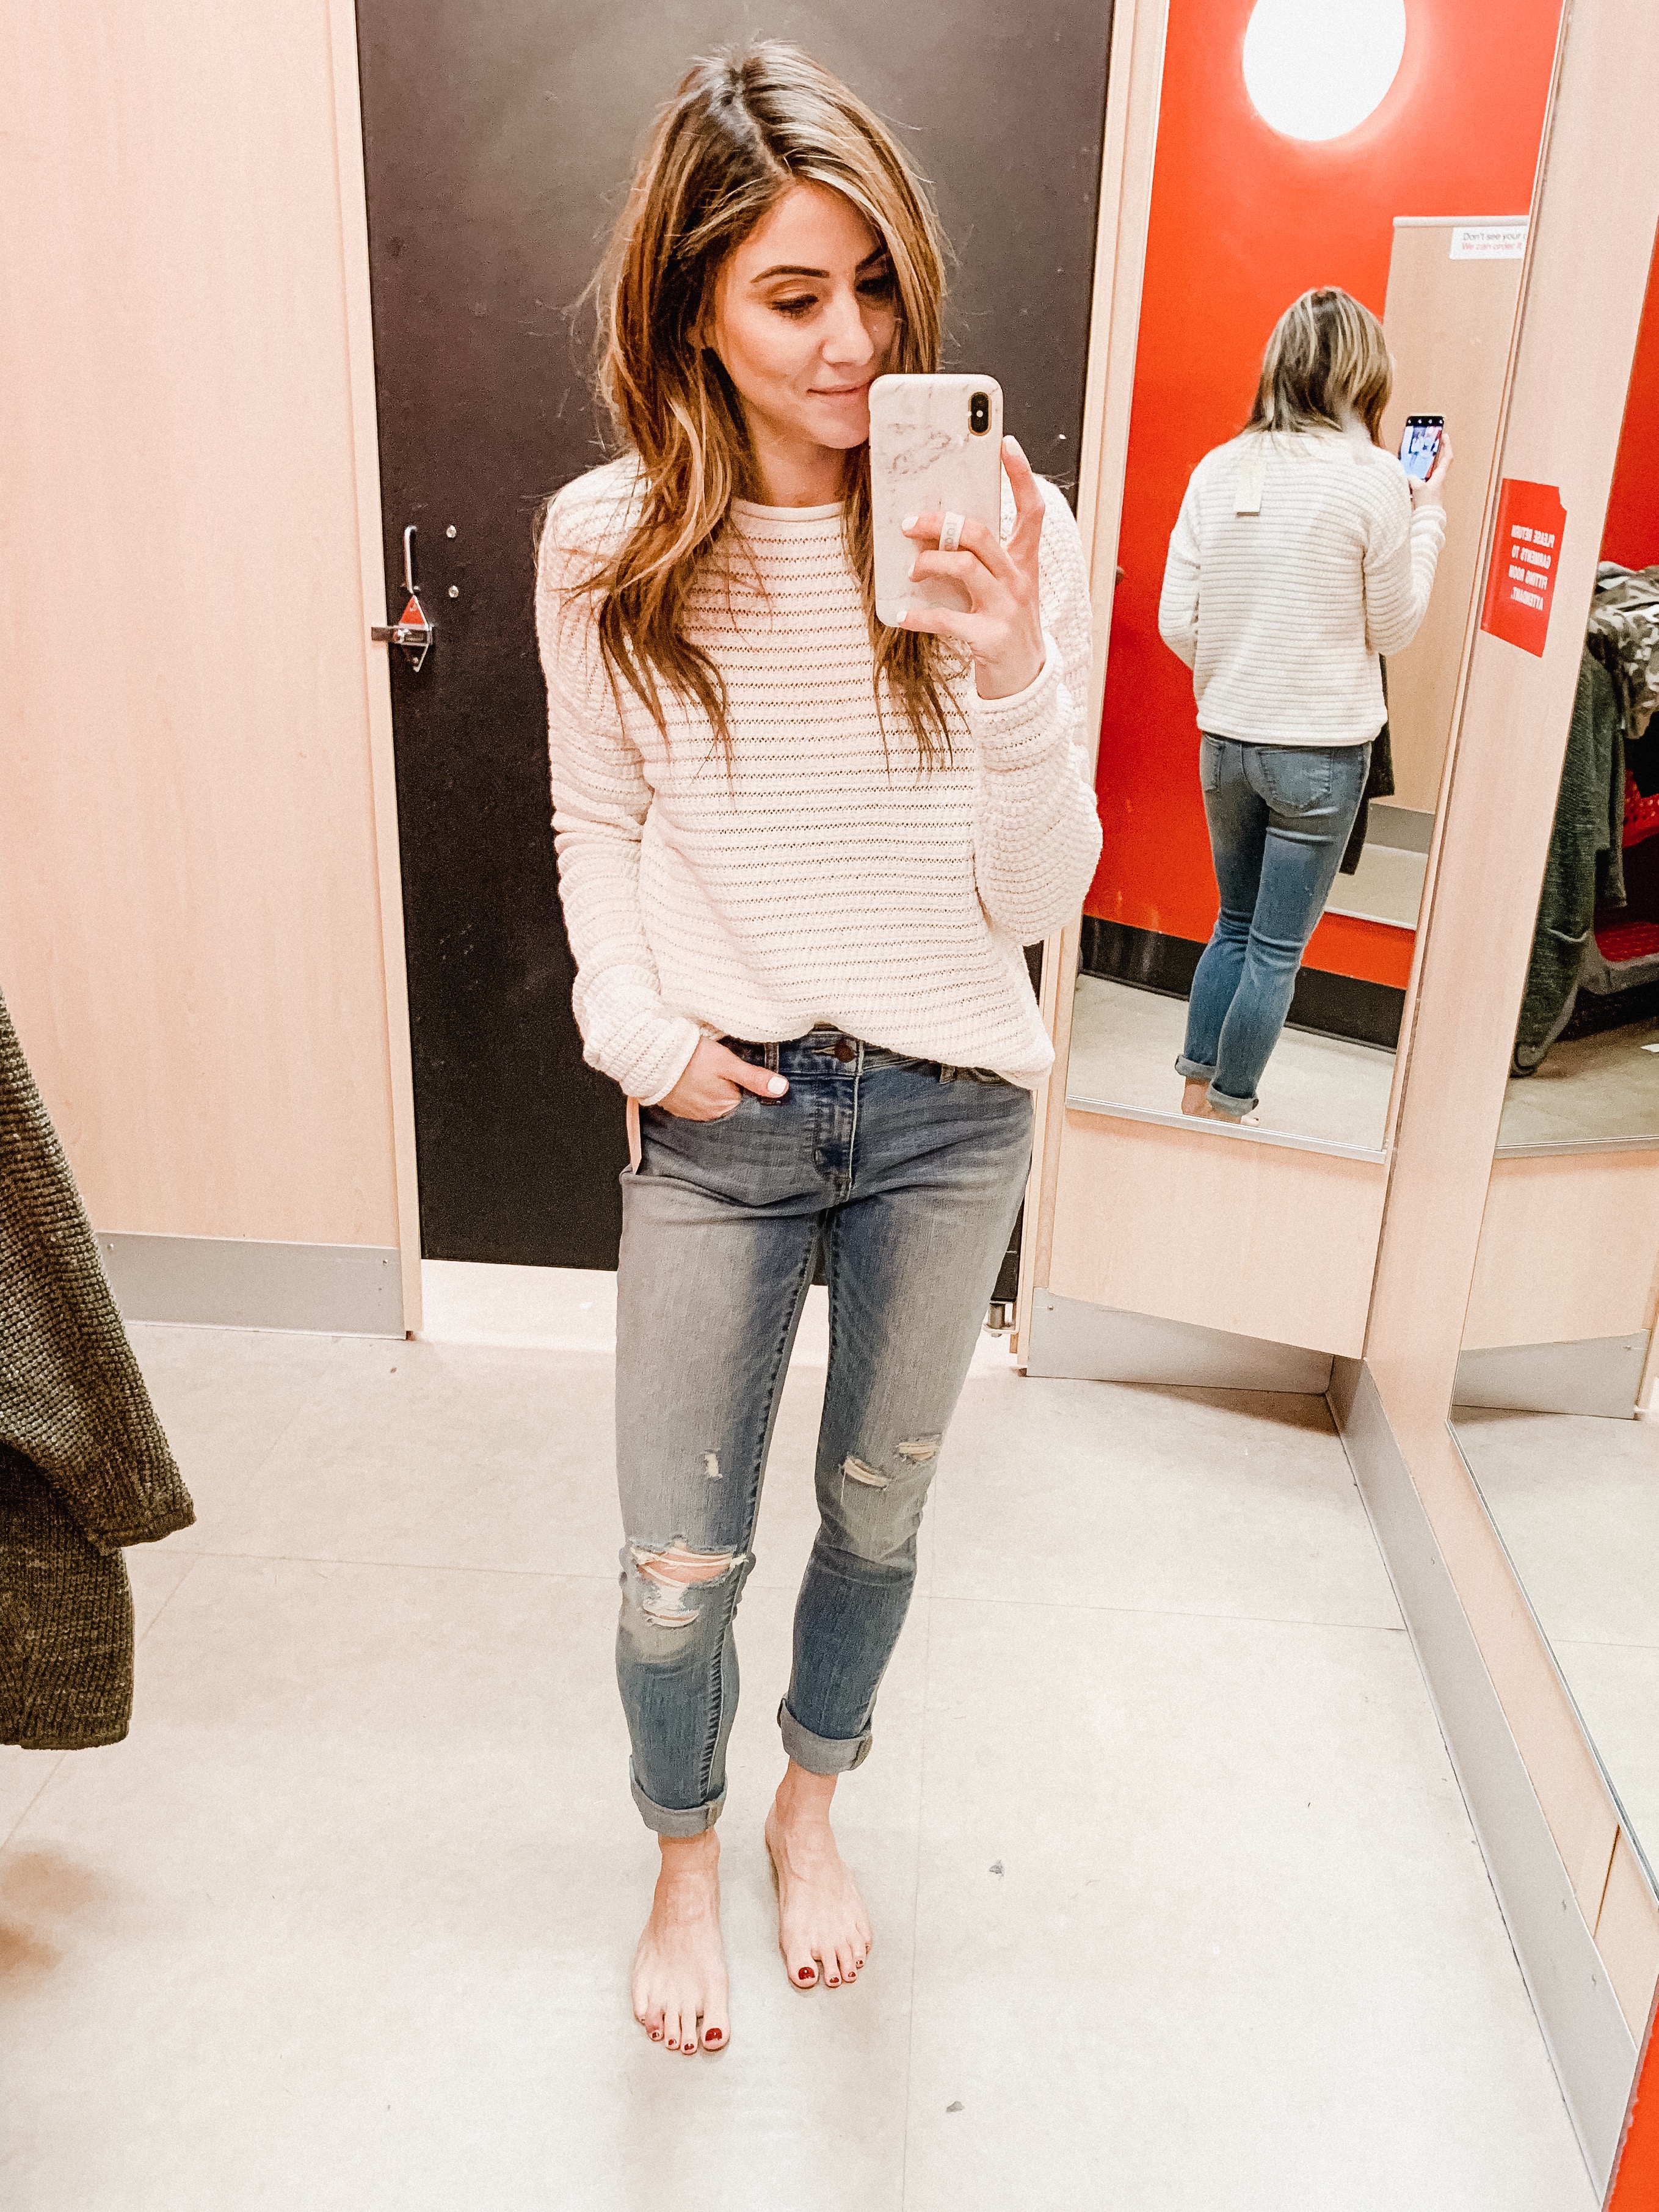 Connecticut life and style blogger Lauren McBride shares a January Target try on featuring outfits and home decor.